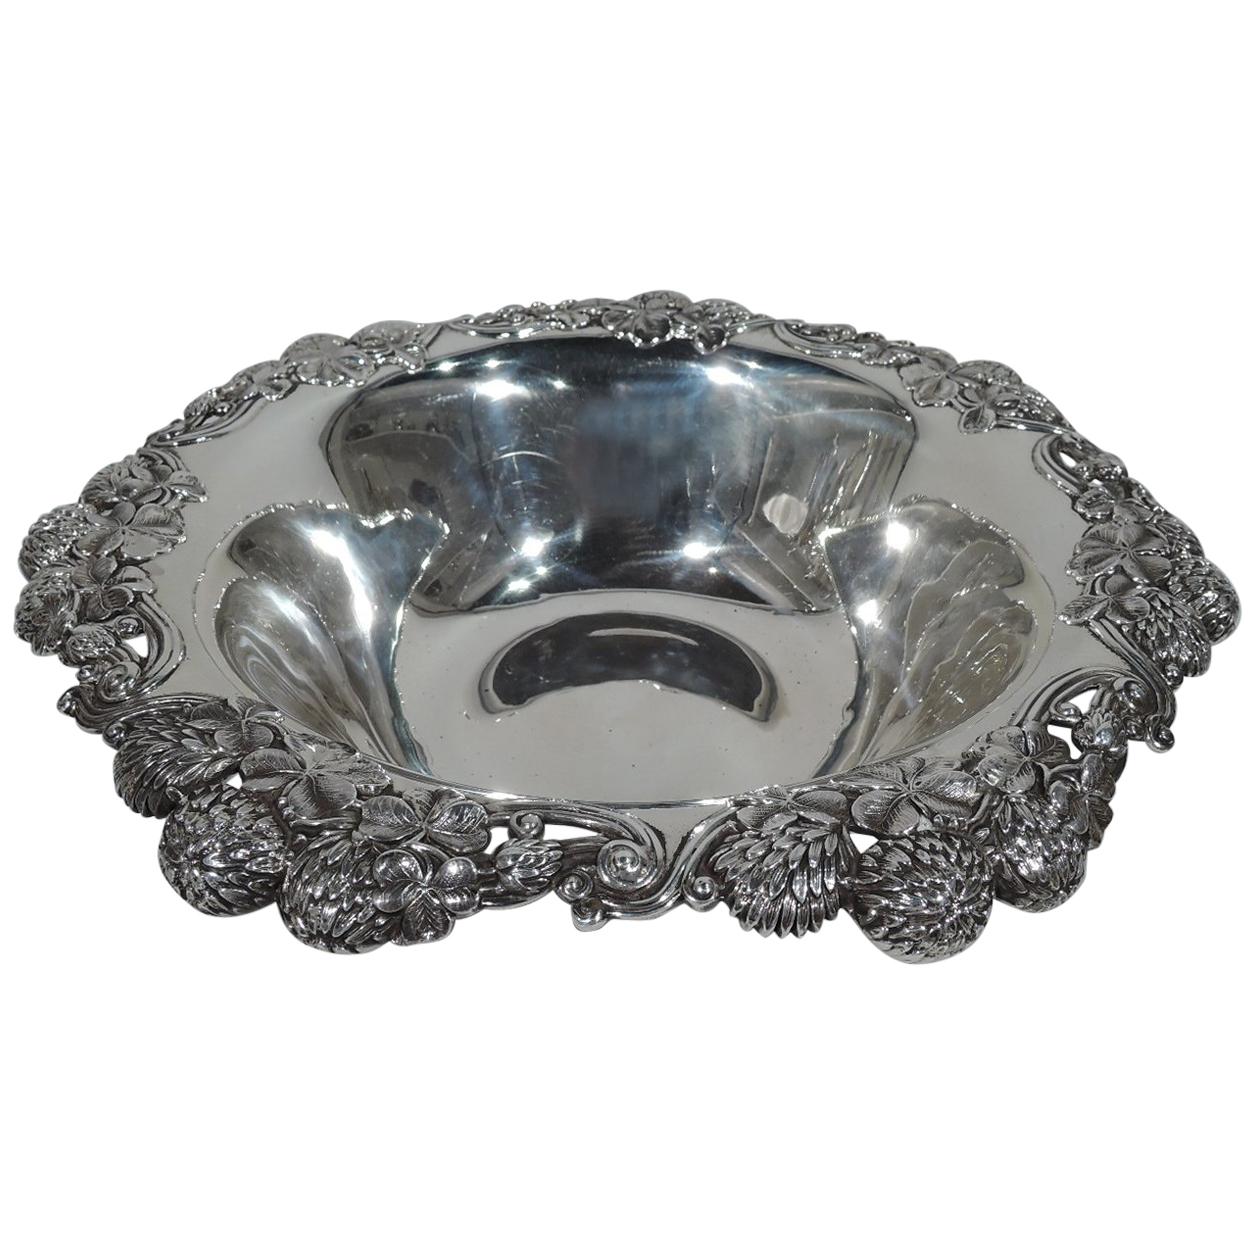 Tiffany Sterling Silver Bowl in Classic Clover Pattern